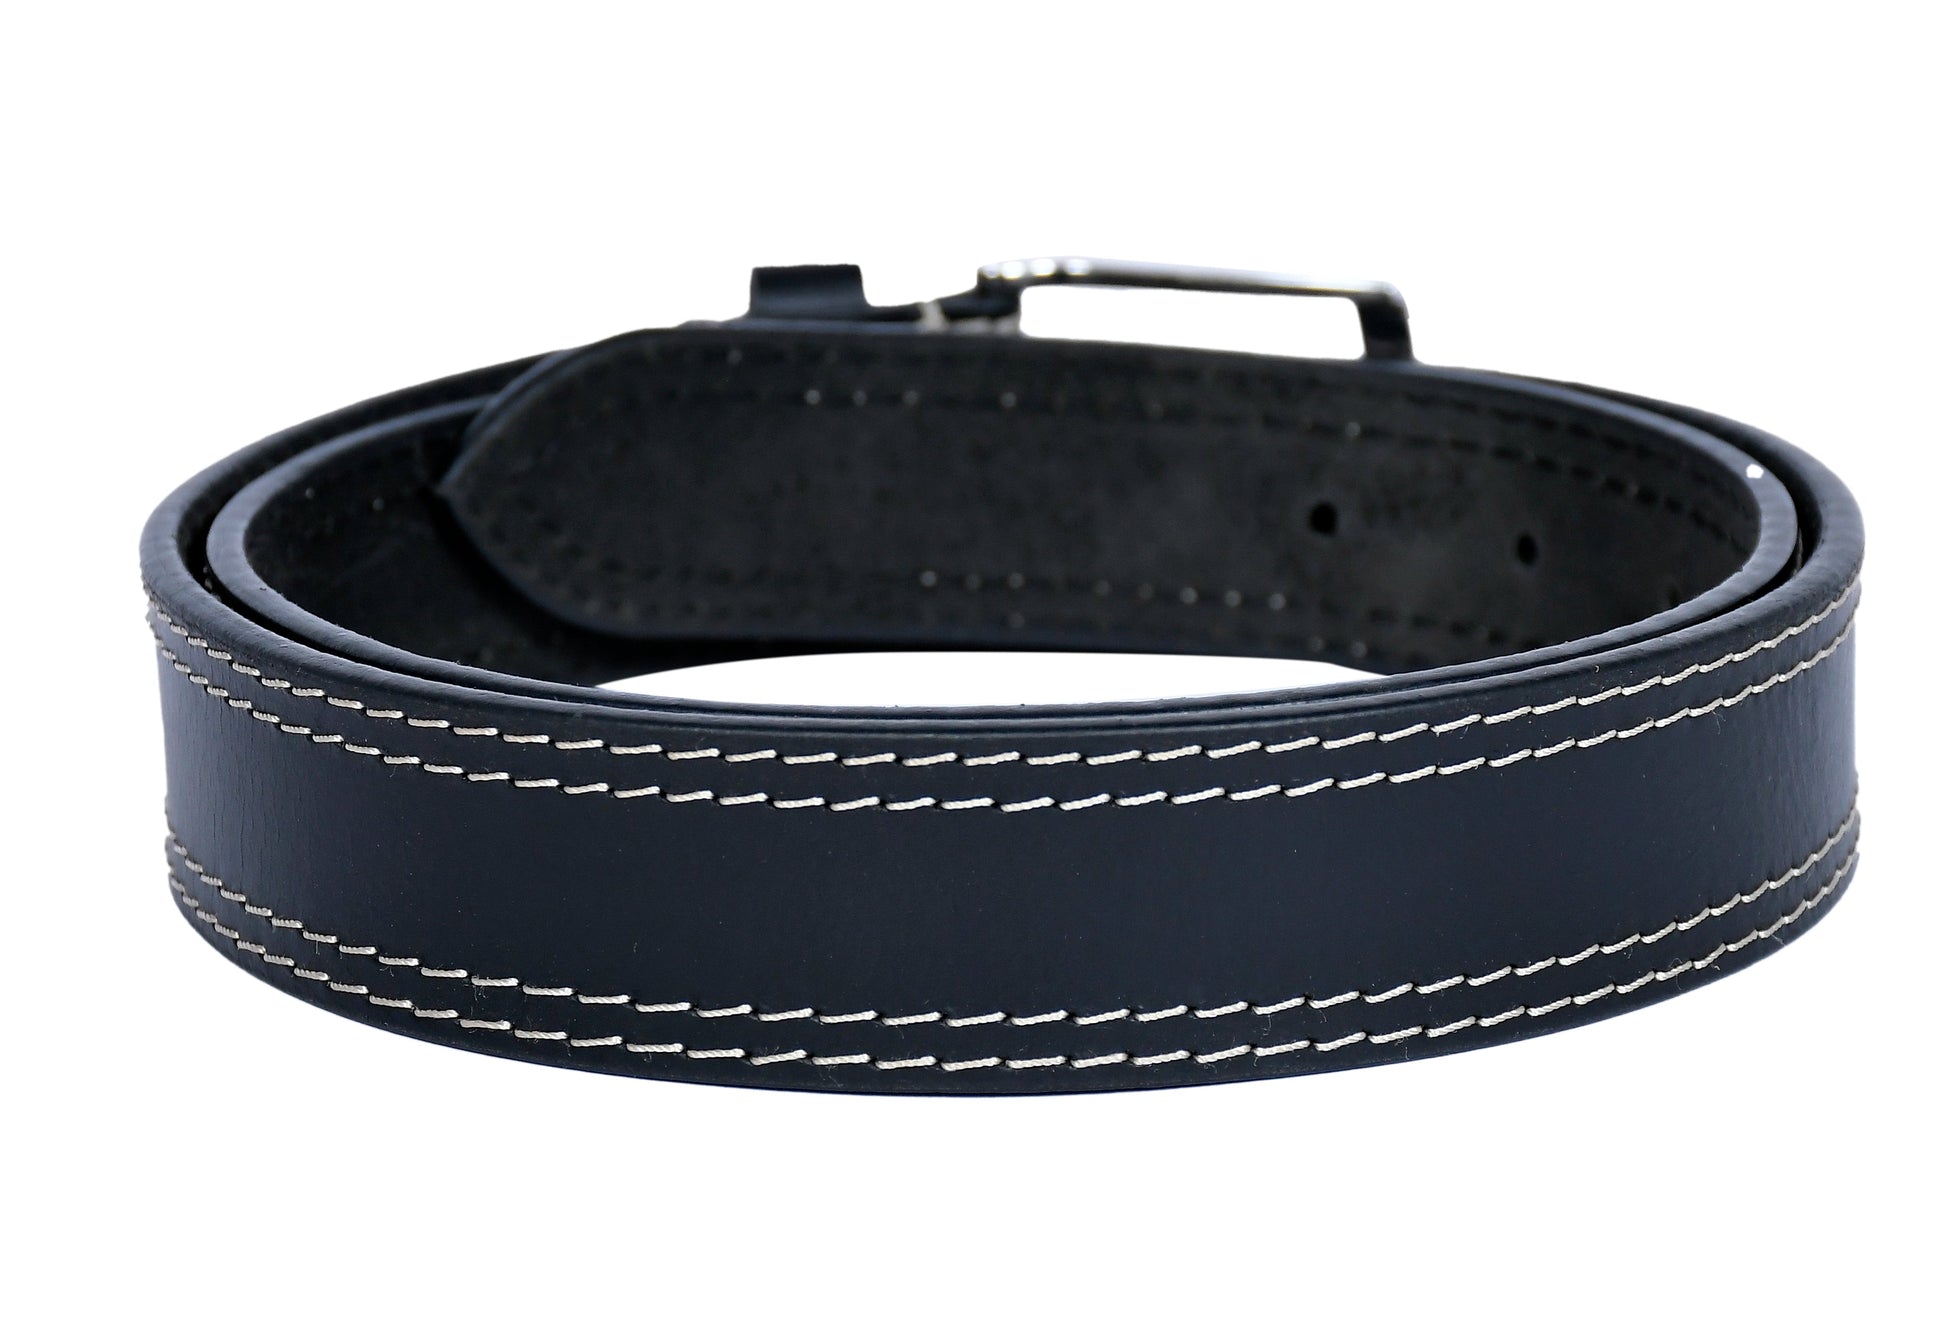 Introducing our "Eclipse Noir" Black Leather Belt with White Stitching. - CELTICINDIA